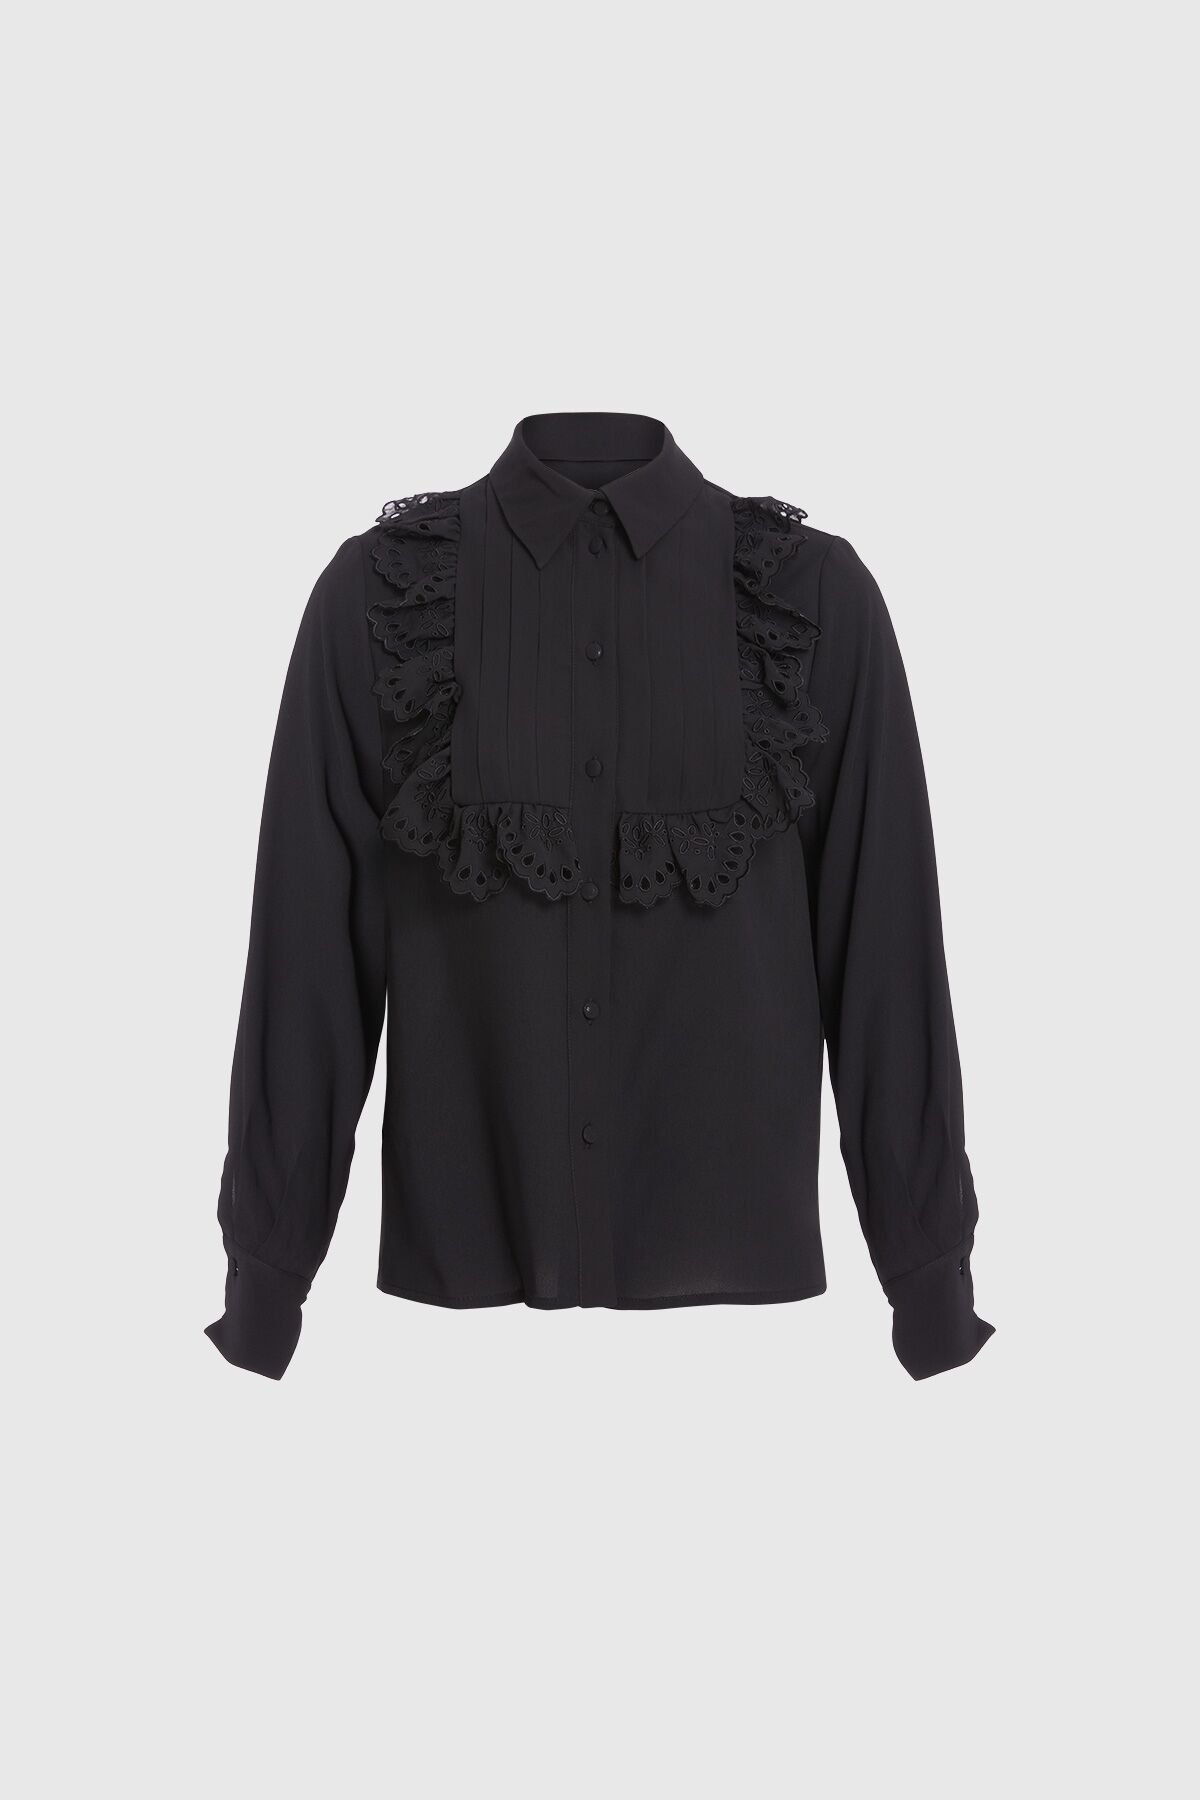  GIZIA - Embroidered Detailed Black Blouse